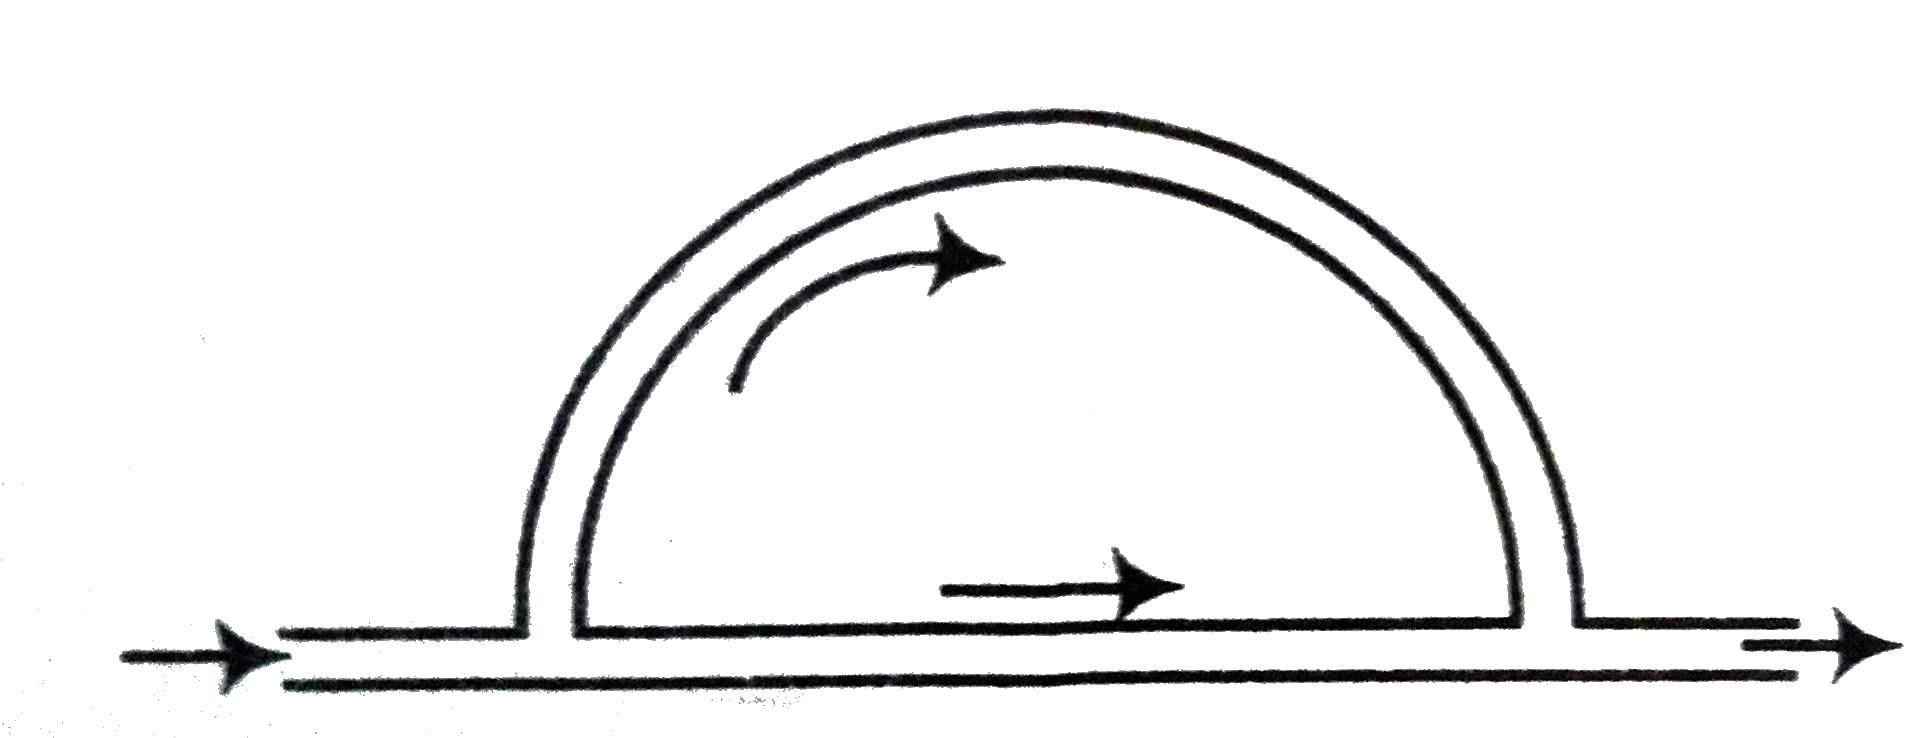 Sound waves are passing through two routes-one in straight path and the other along a semicircular path of radius r and are again combined into one pipe and superposed as shown in the figure. If the velocity of sound waves in the pipe is v, then frequencies of resultant waves of maximum amplitude will be multiples integral of